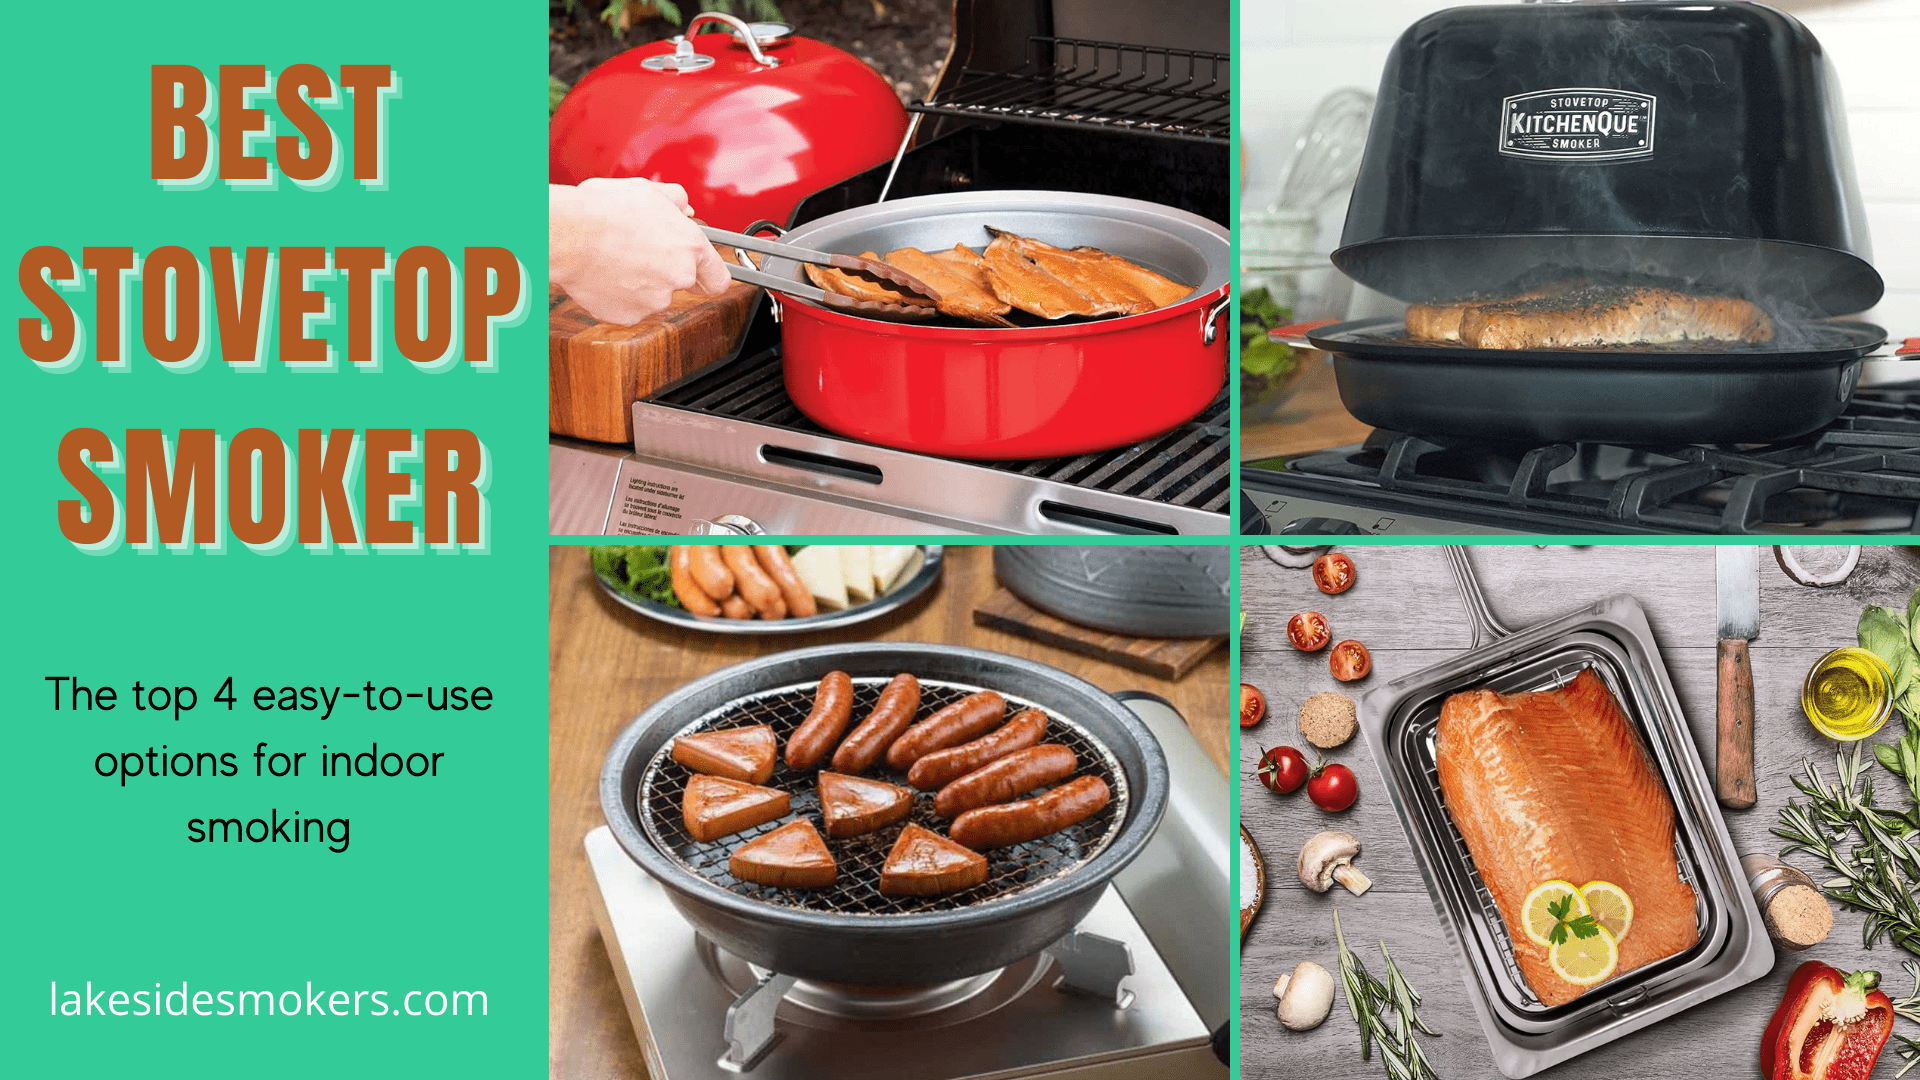 Best stovetop smoker | The top 4 easy-to-use options for indoor smoking